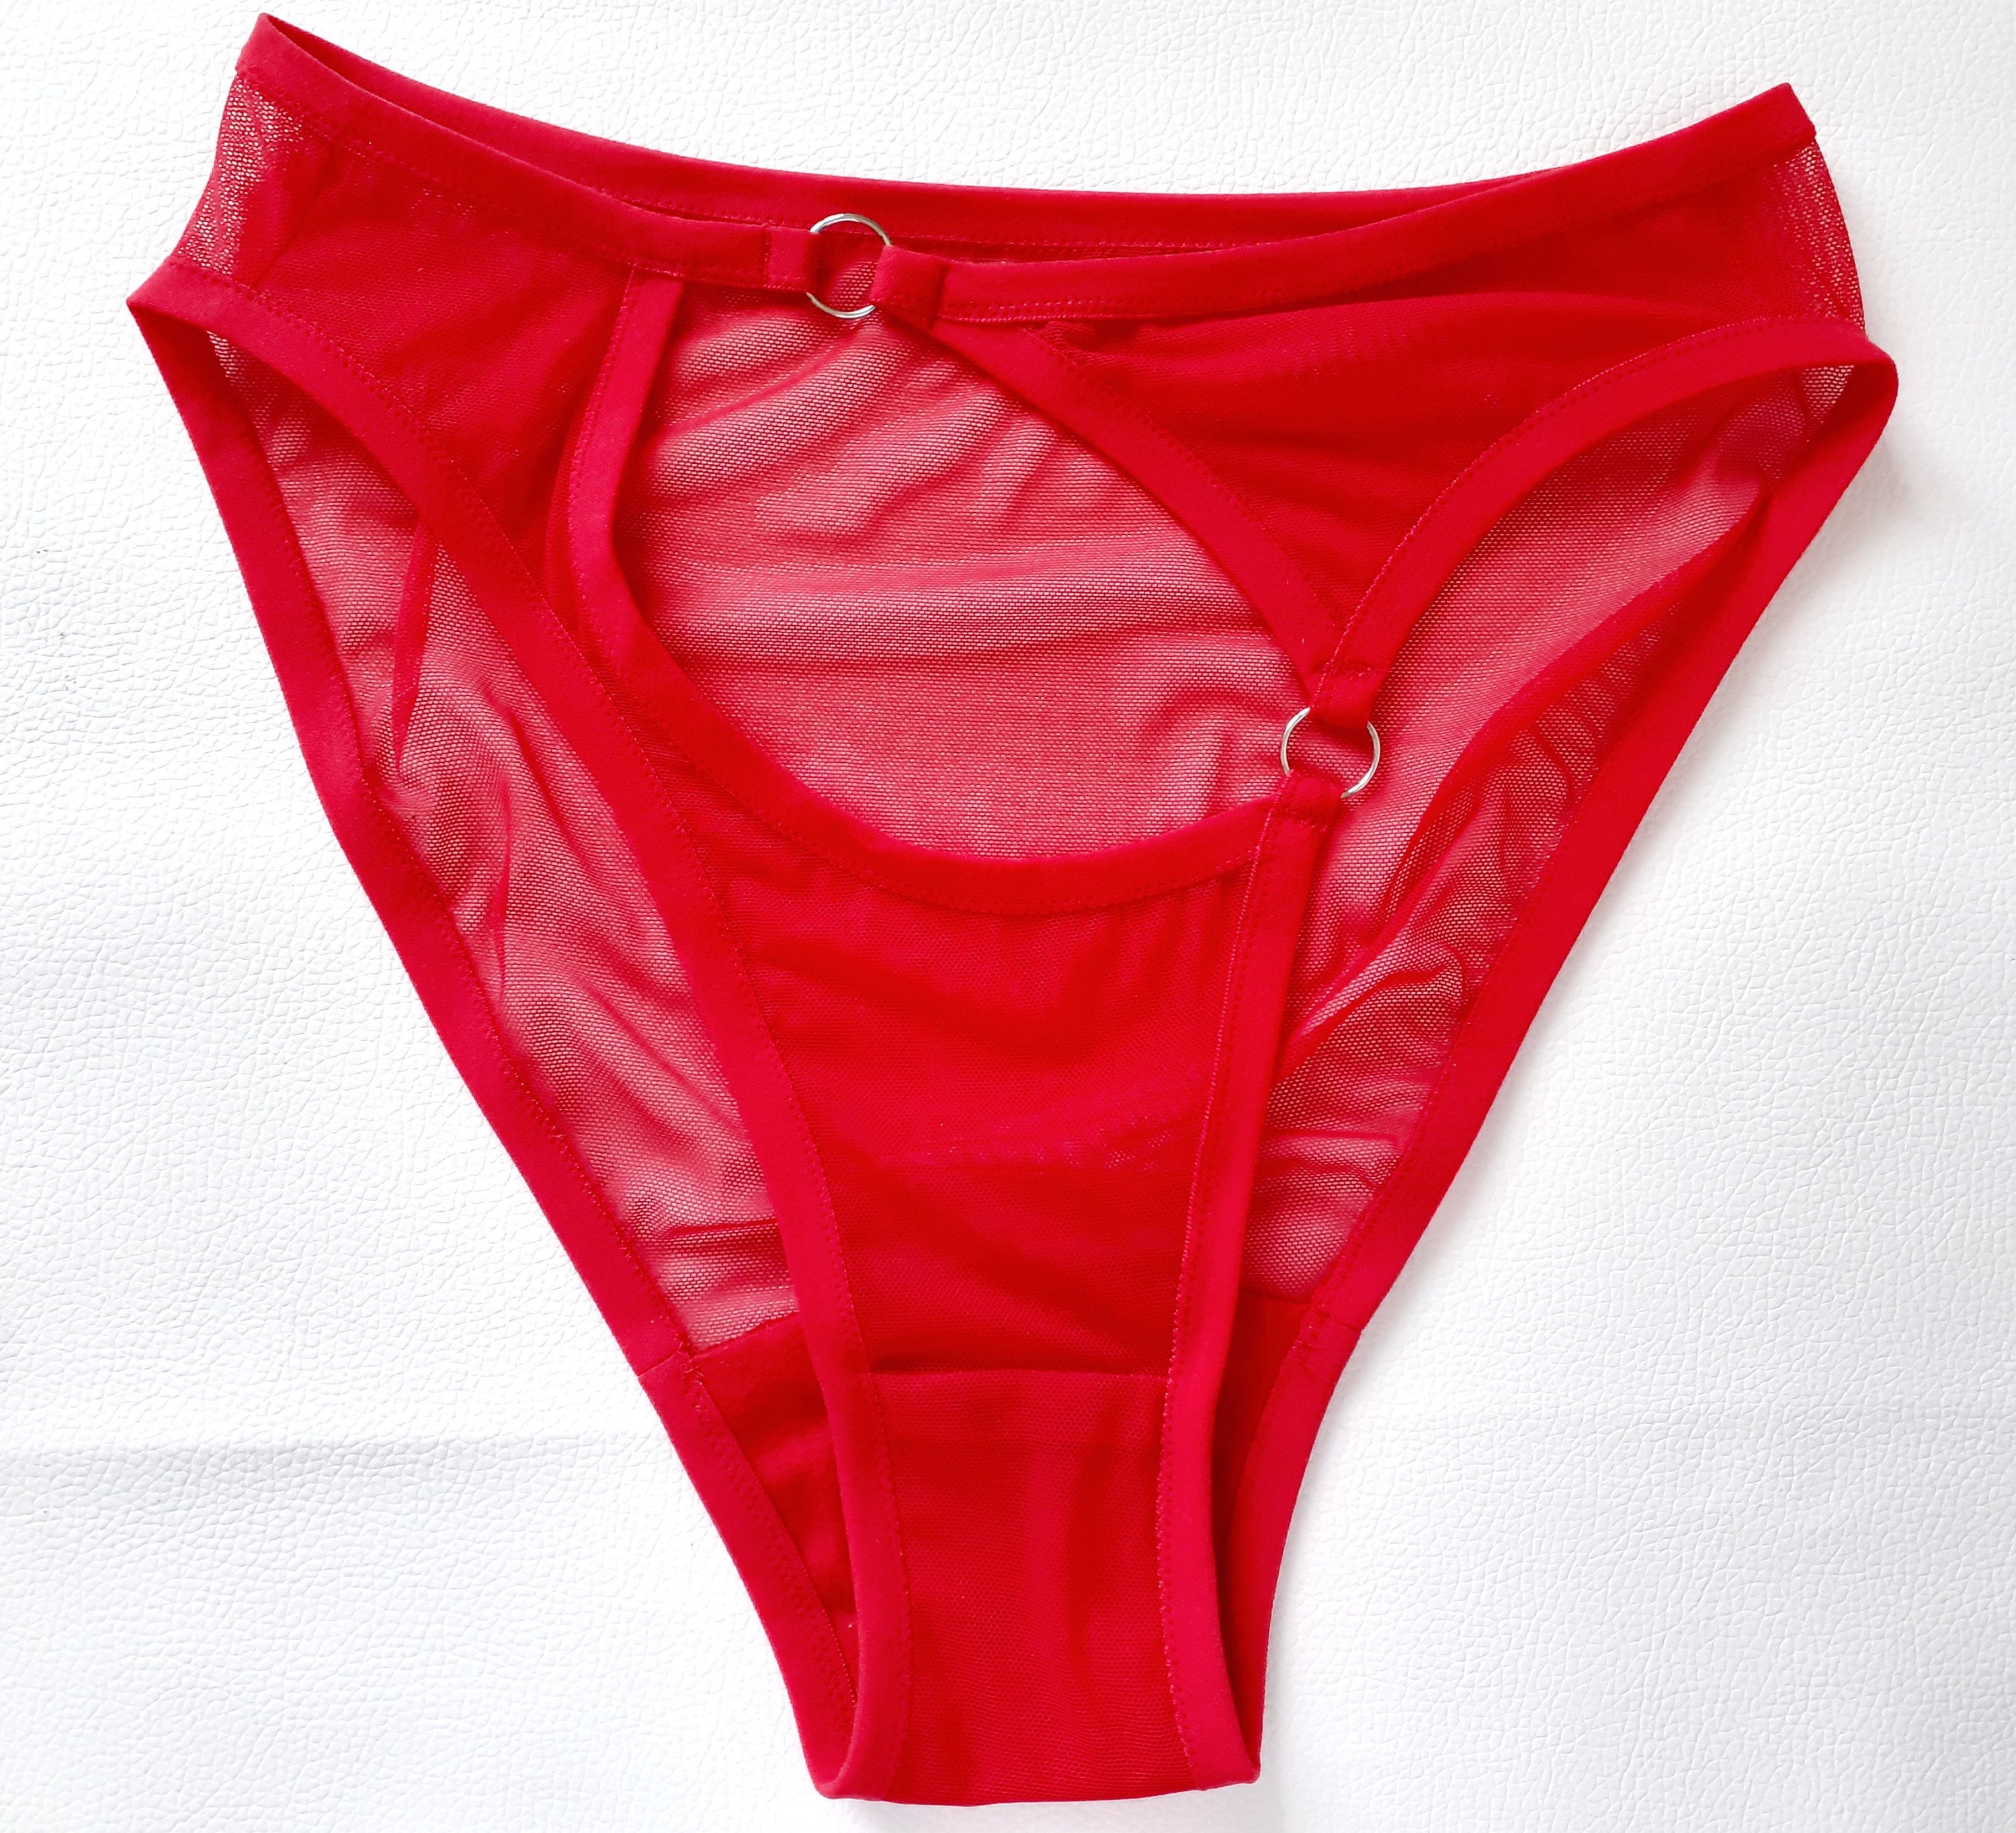 Red mesh FLOOZY sheer knickers. High leg see thru soft stretch fabric. Cut out high waist panties. Handmade to order sexy erotic lingerie photo